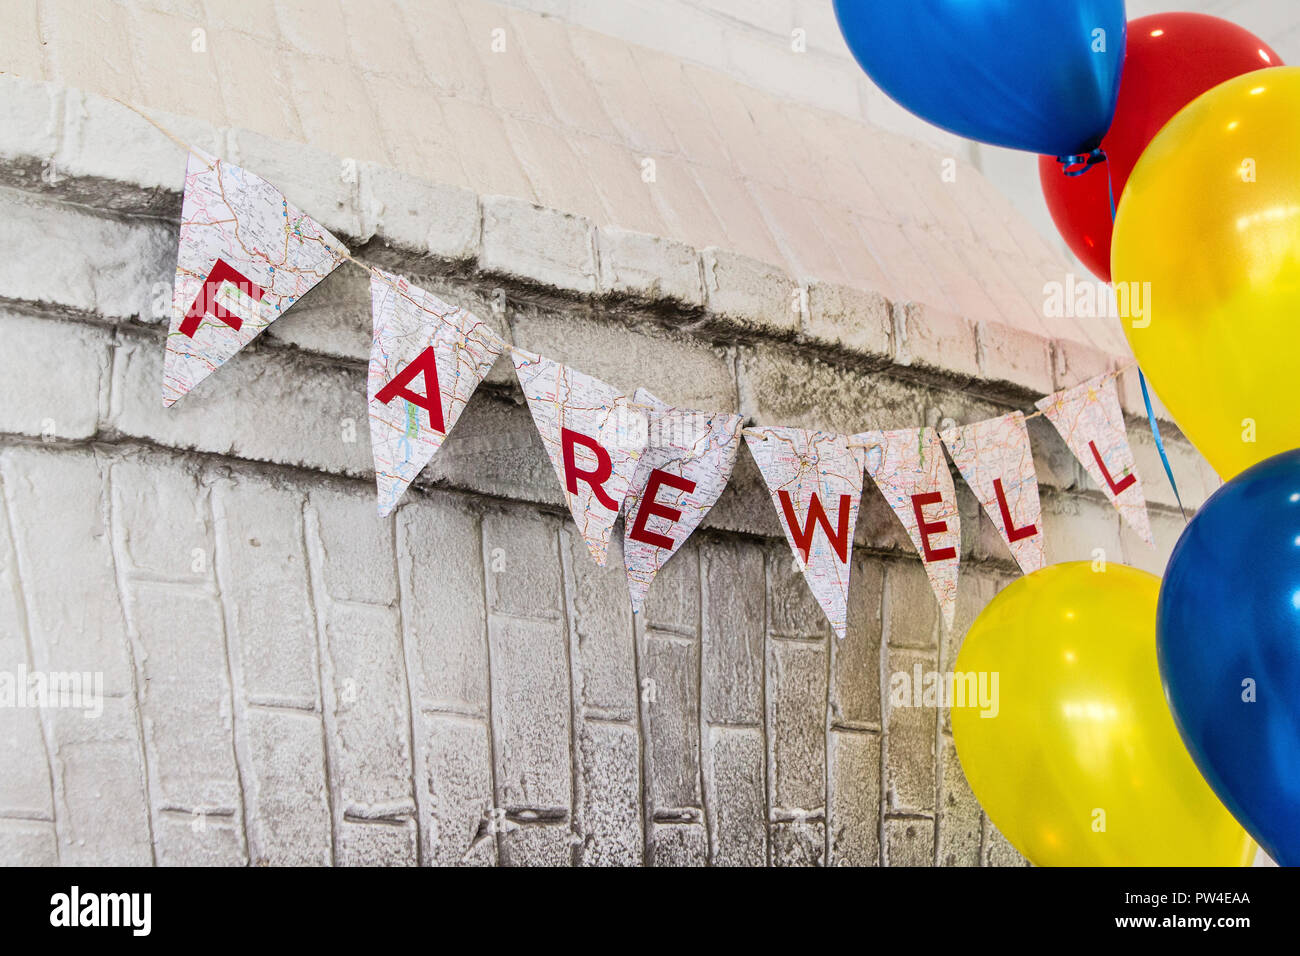 Farewell text on buntings by colorful helium balloons hanging against wall Stock Photo